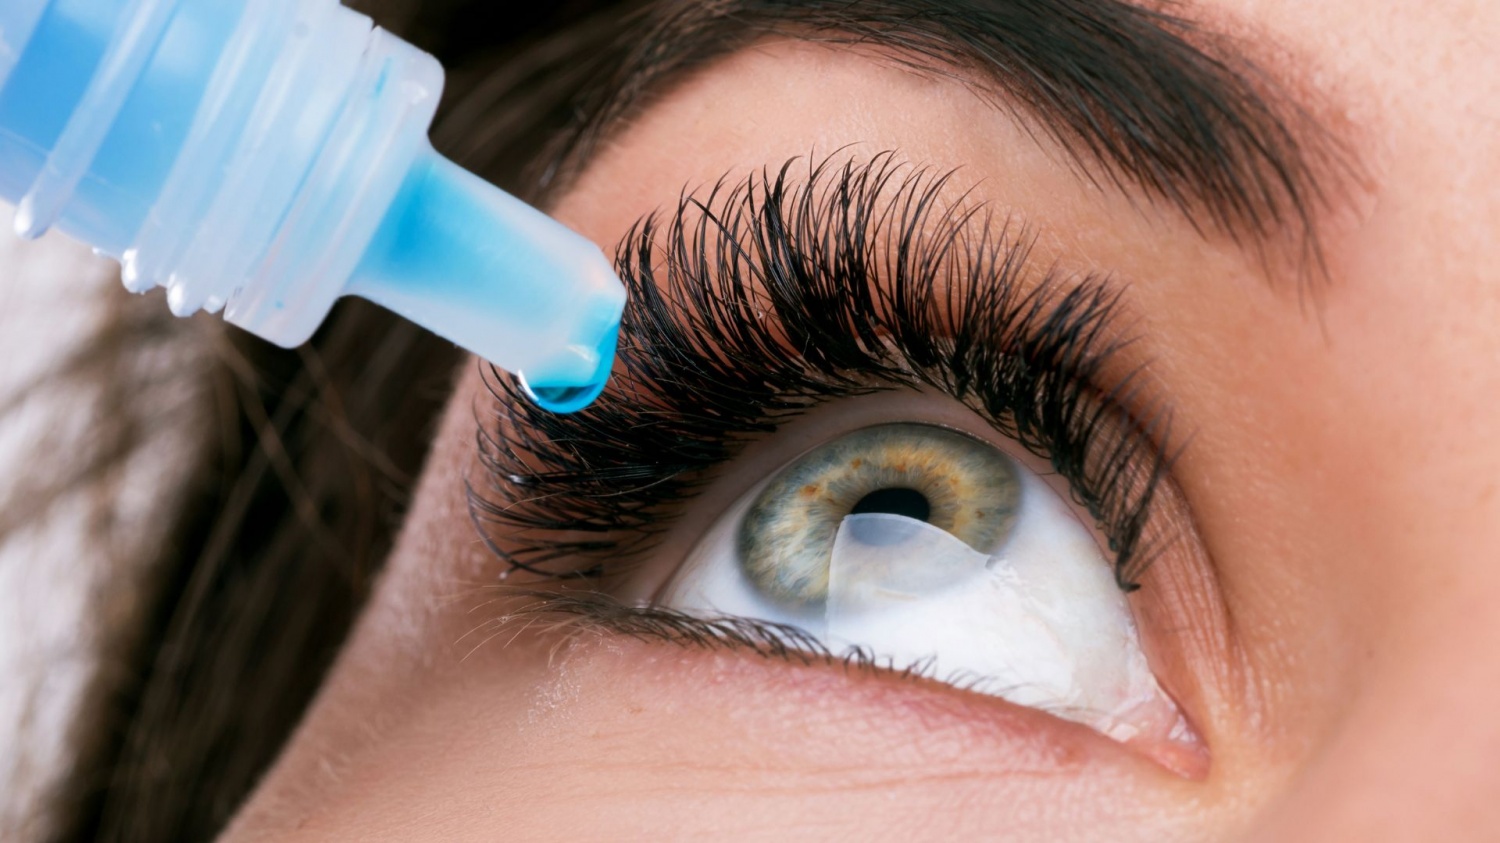 FDA Issues Urgent Warning 26 Eye Drops Recalled Over Risk of Blindness